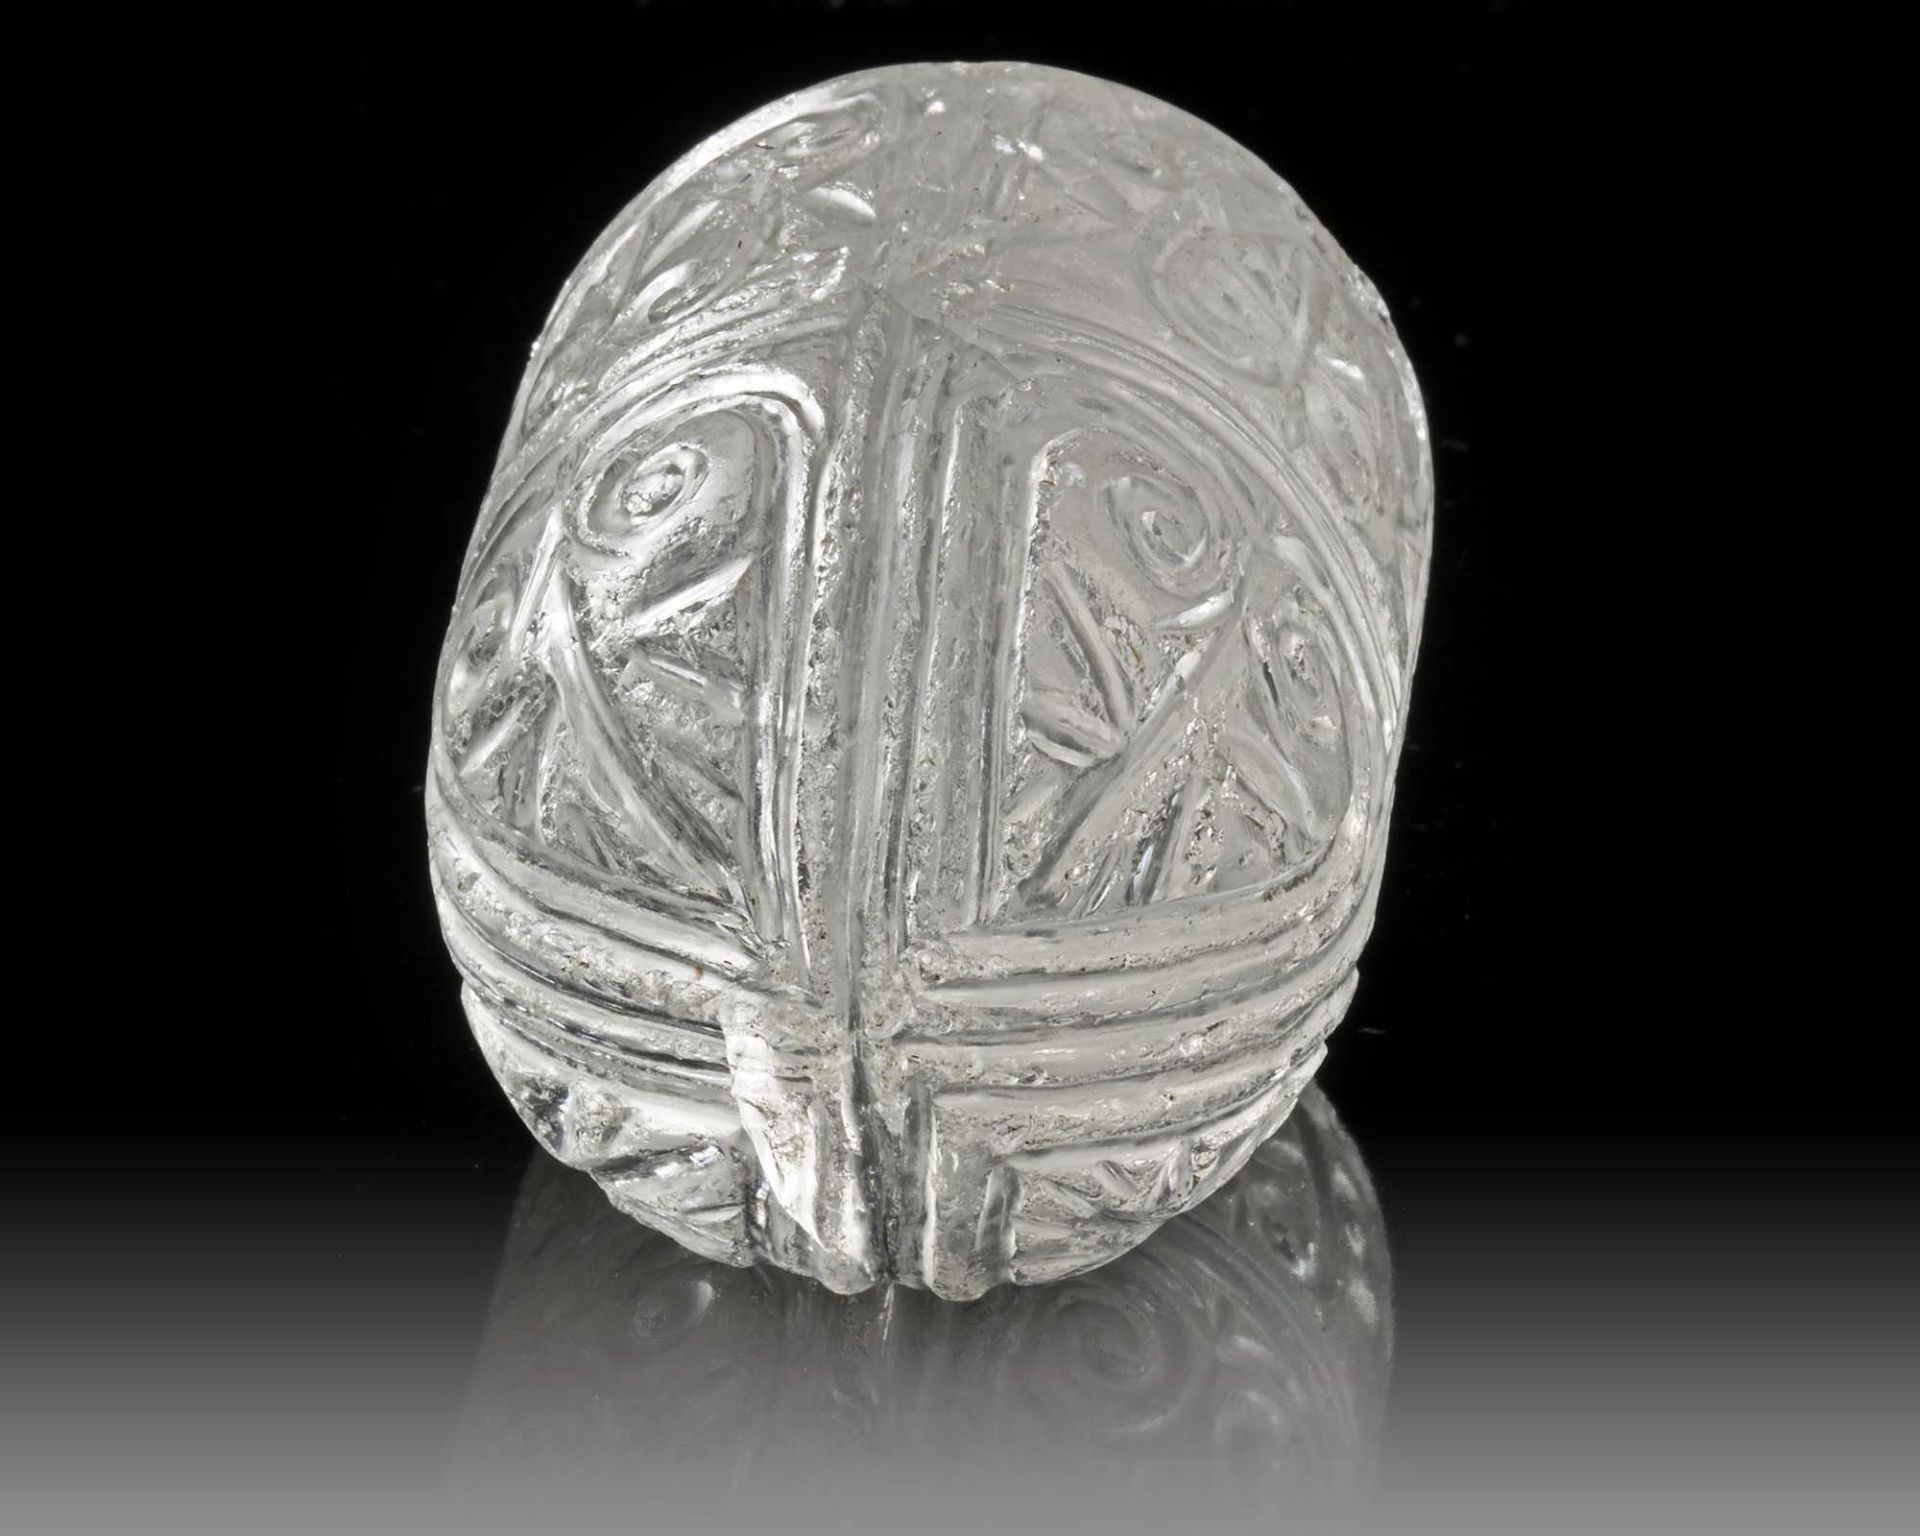 A FATIMID ROCK CRYSTAL CHESS PIECE, EGYPT, 11TH CENTURY - Image 6 of 8